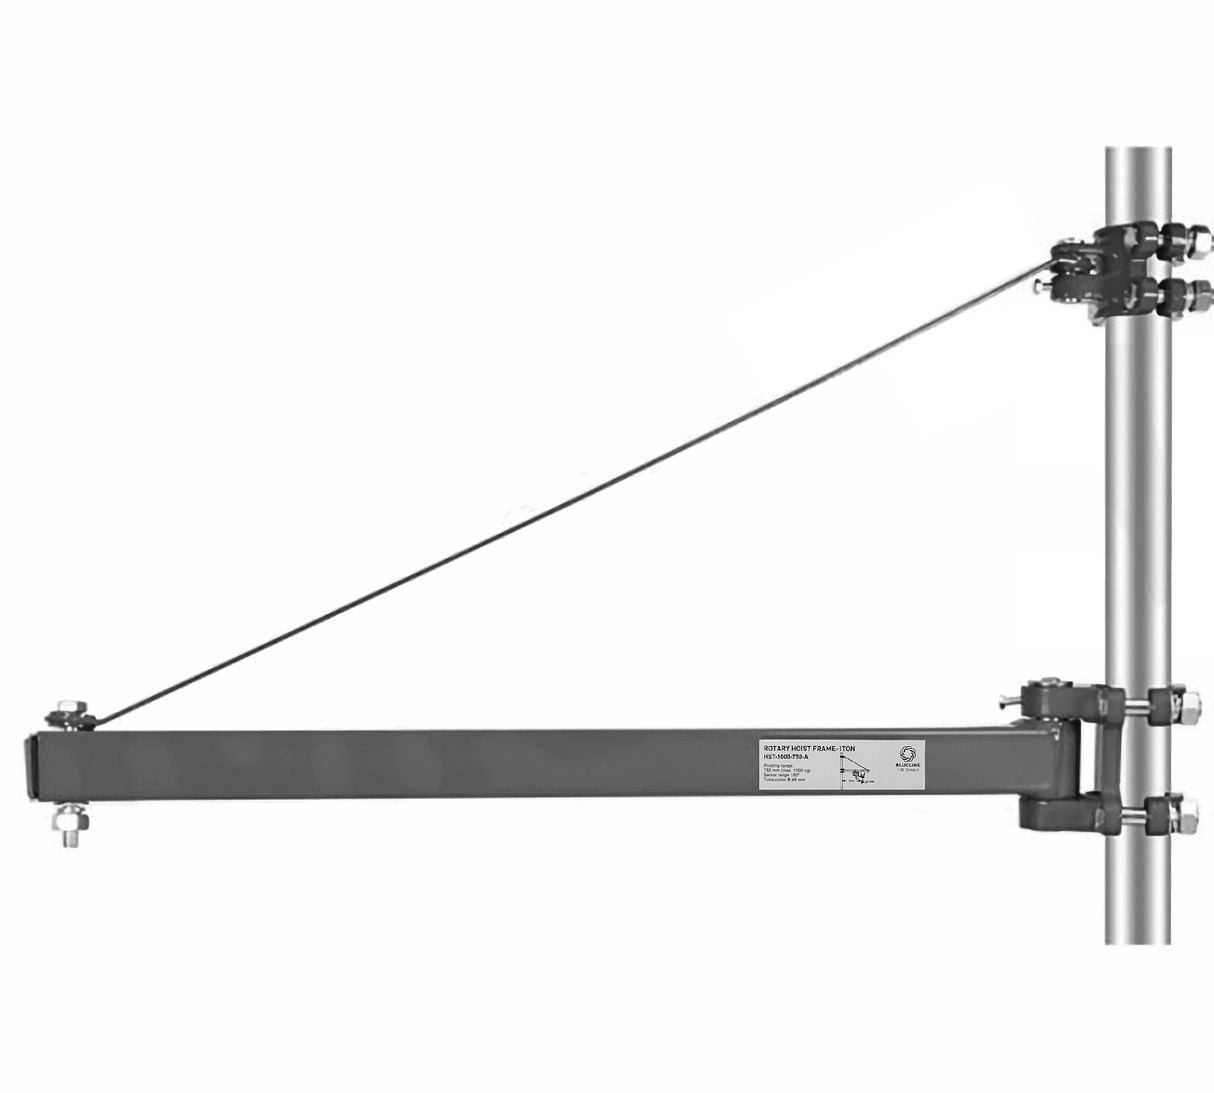 Rotary Frame for Electric or Manual Hoist 180 Degrees. Holds 1000kg at Fixed Length of 750cm